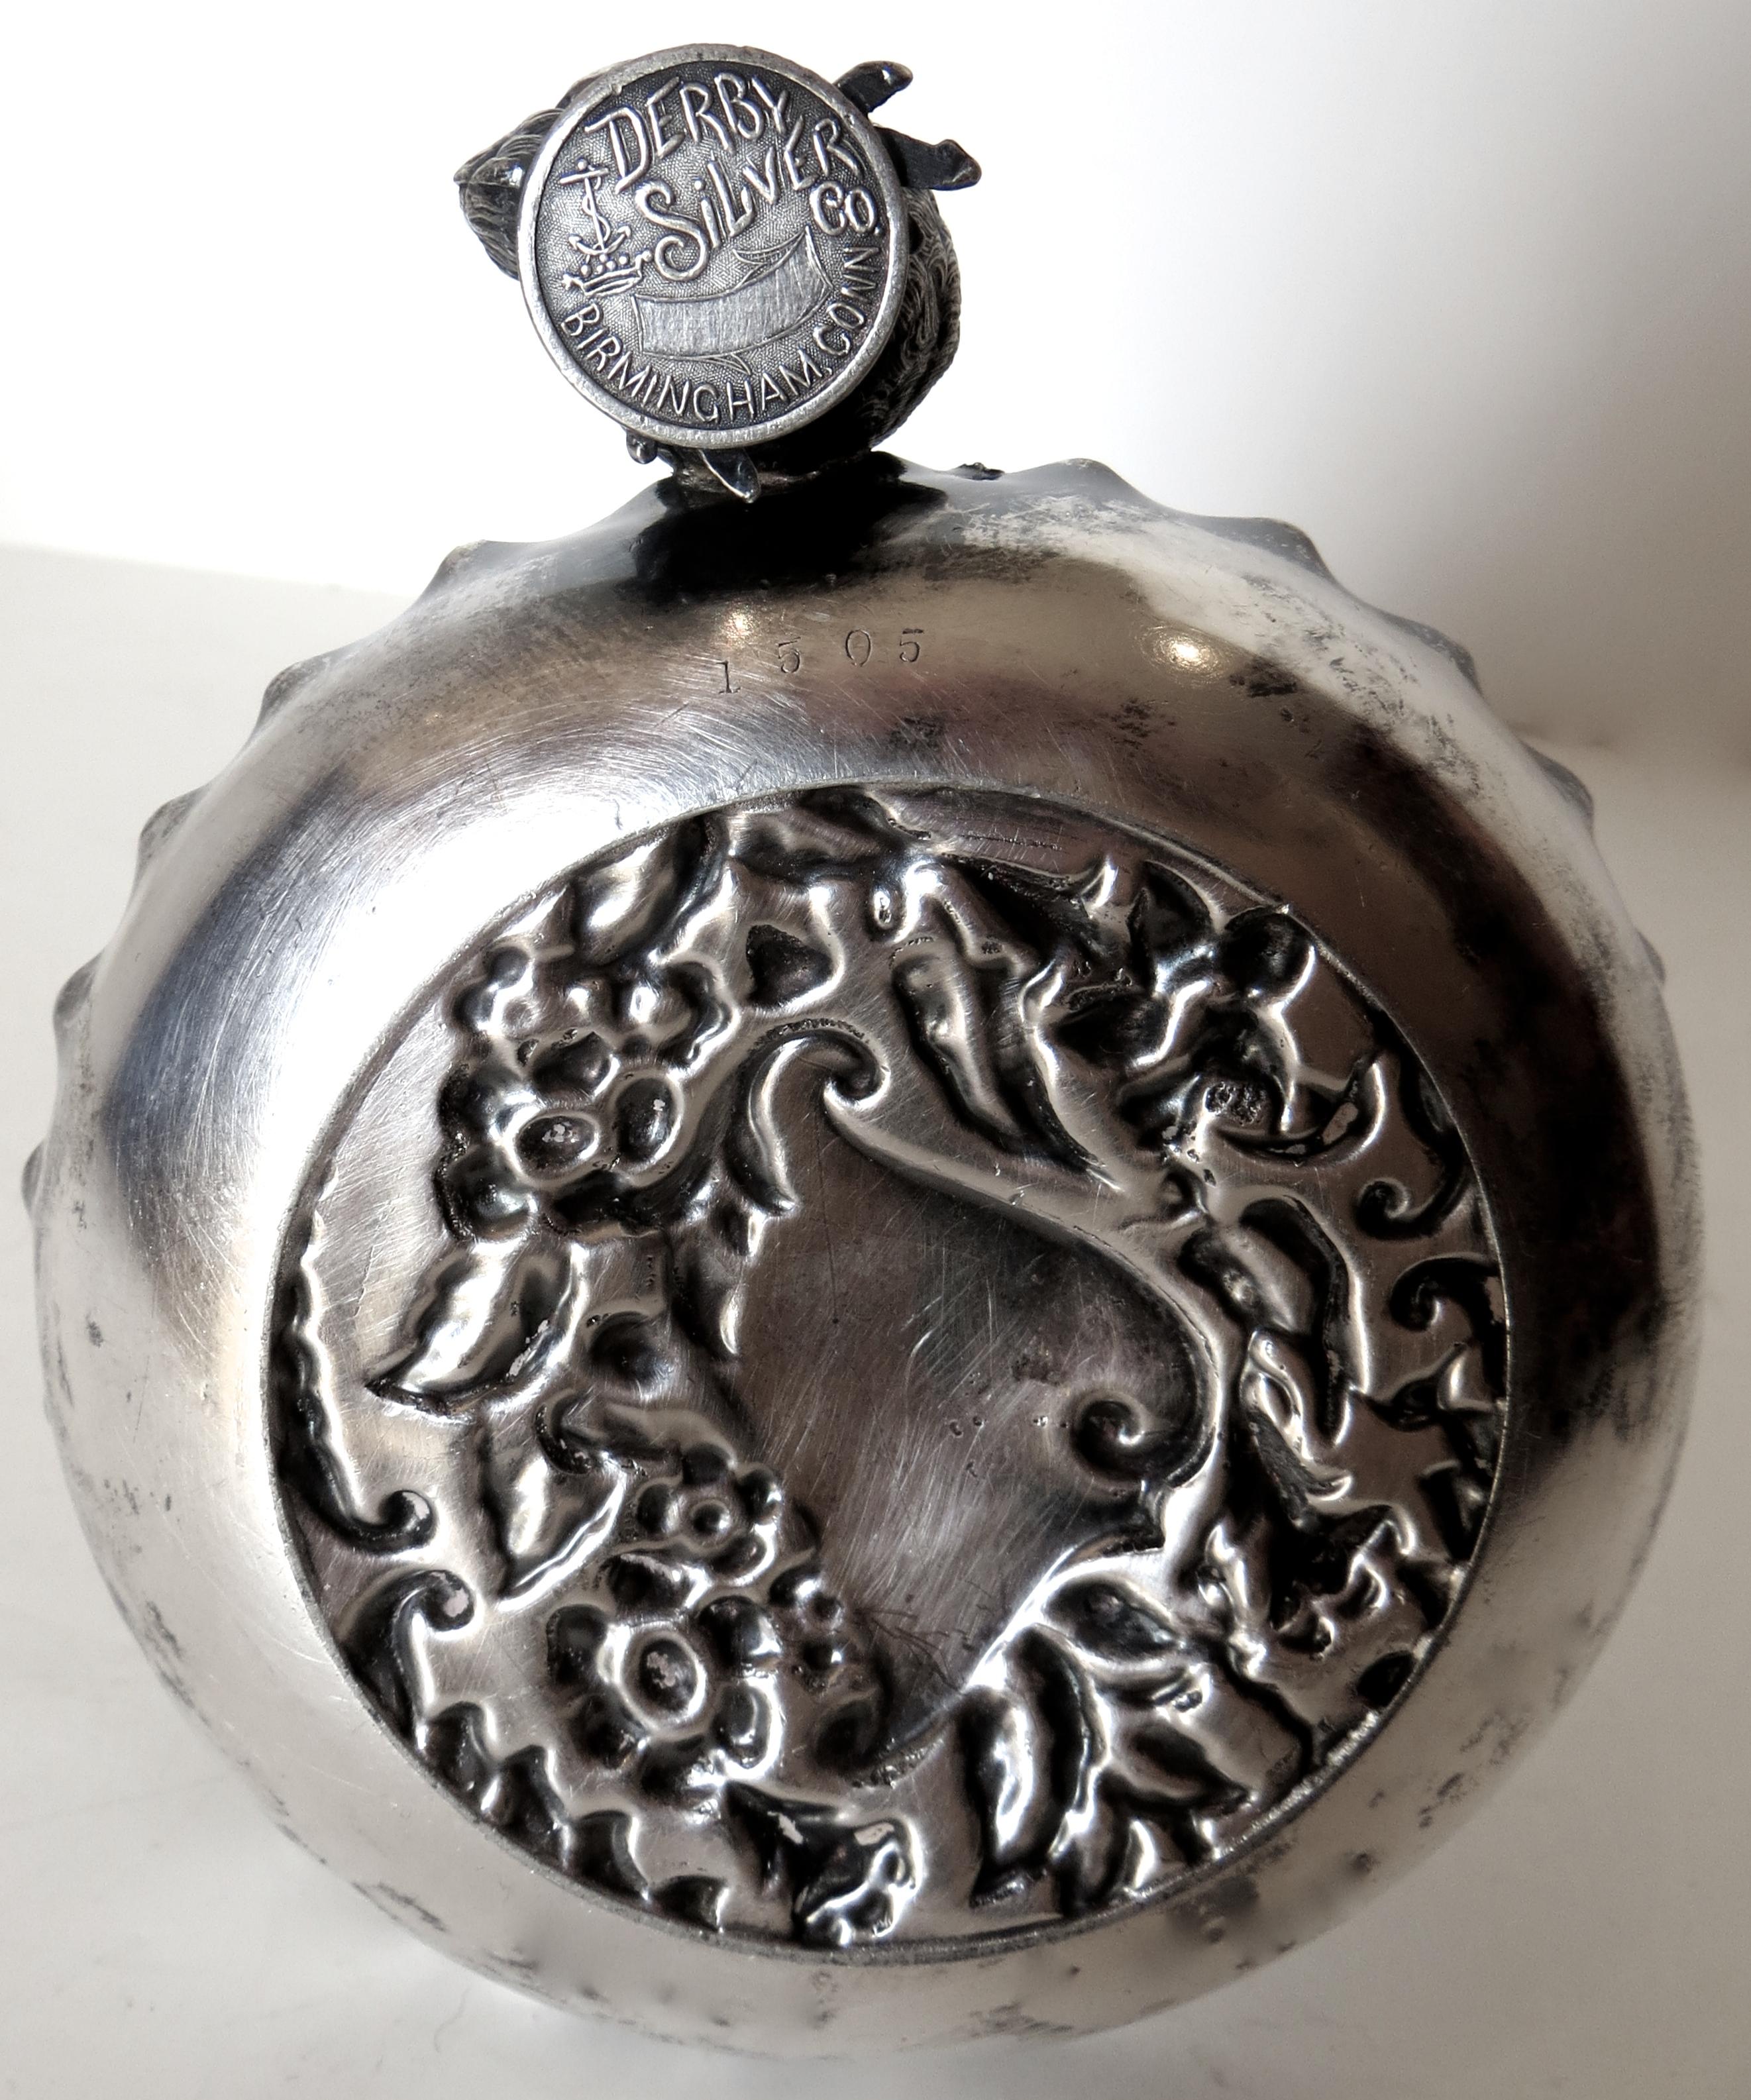 Hand-Crafted Silver Plated Combination Cigar Cutter/Bud Vase by Derby, Connecticut circa 1885 For Sale